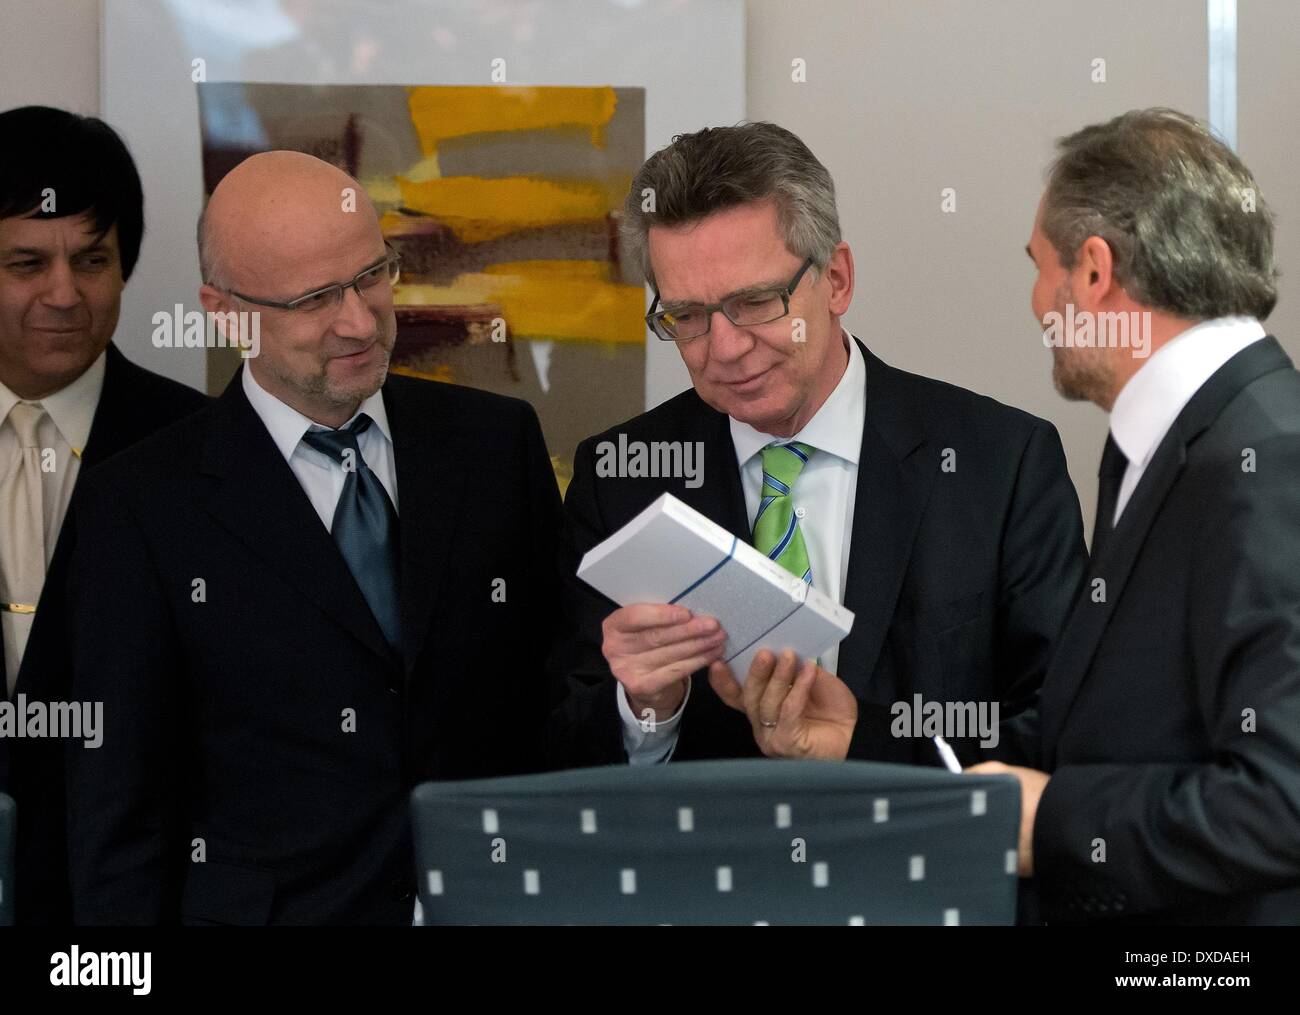 German Minister of the Interior Thomas de Maiziere (CDU, 2-R) talks to Abdelkader Rafoud (L) of the Central Council of Moroccans in Germany, representative of the Islamic Community of Bosniaks in Germany, Bernes Alihodzic (2-L) and chairman of the Turkish-Islamic Union, Bekir Alboga (R) before a consultation in Berlib, Germany, 24 March 2014. The German Minister of the Interior and representatives of Islamic organisations intend to discuss the new format of the German Islam Conference (DIK), which has existed since 2006. Photo: SOEREN STACHE/DPA Stock Photo